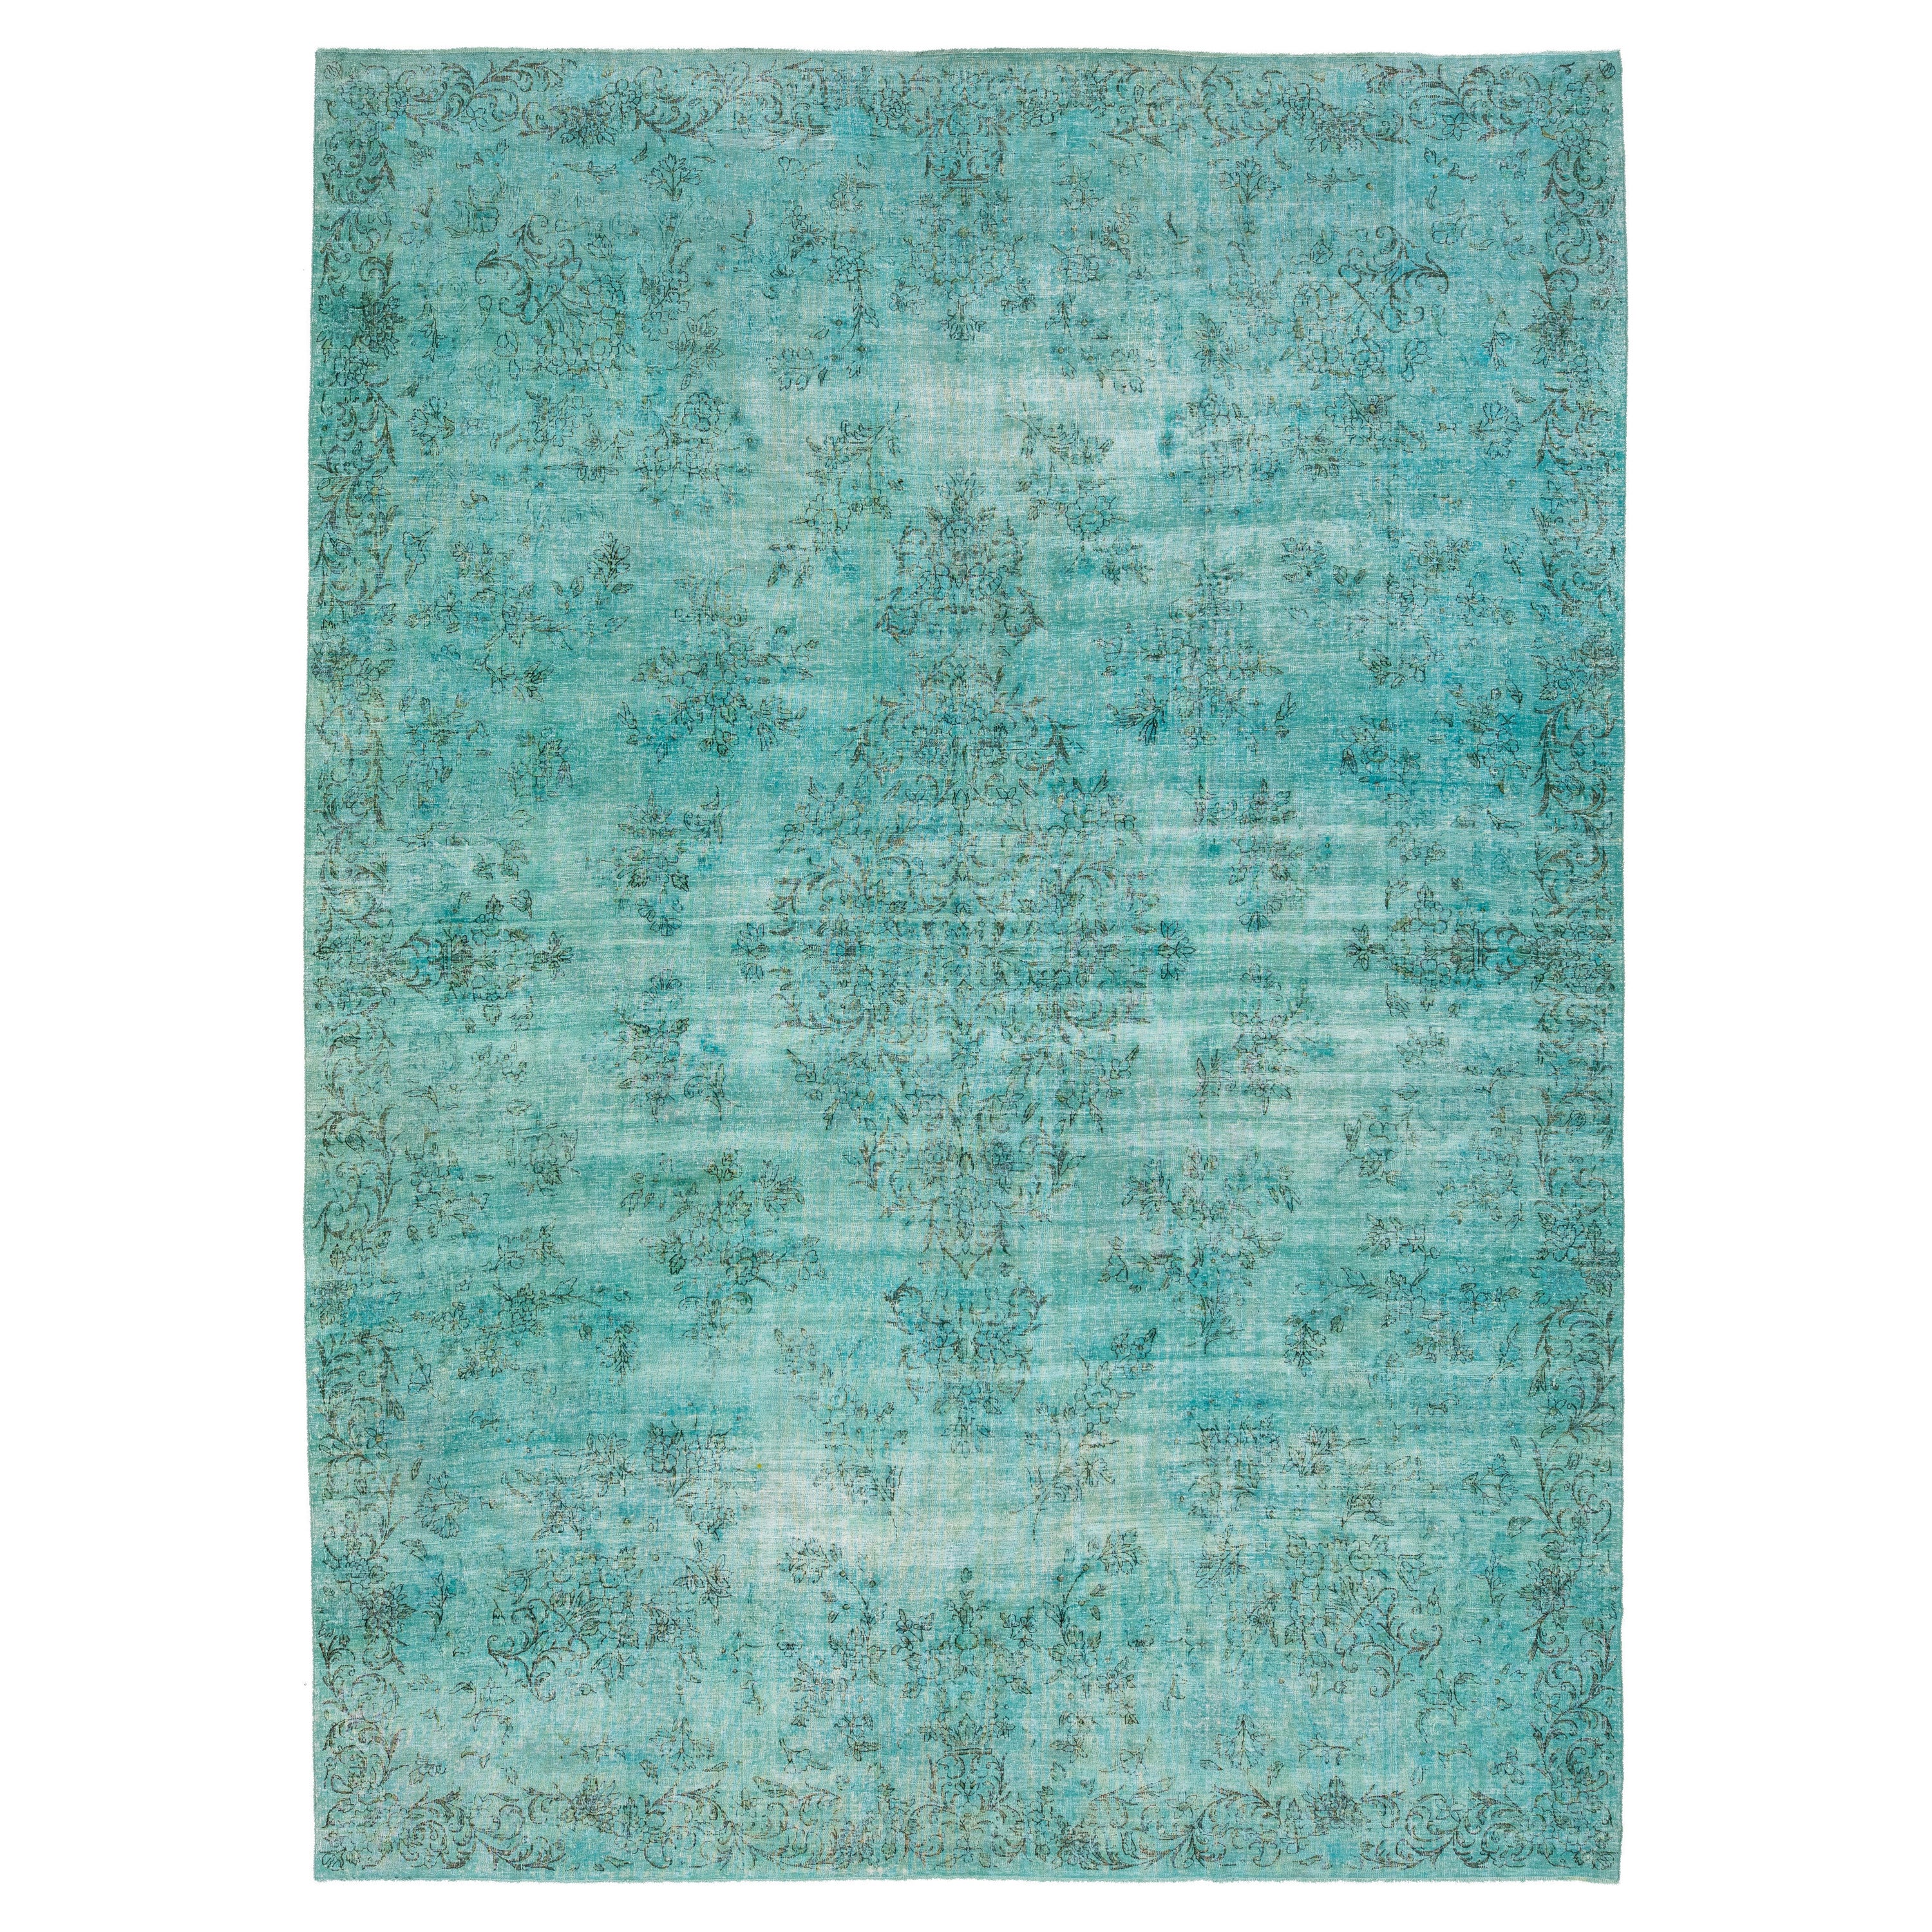 Allove Designed Antique Wool Rug Overdyed In Turquoise Color